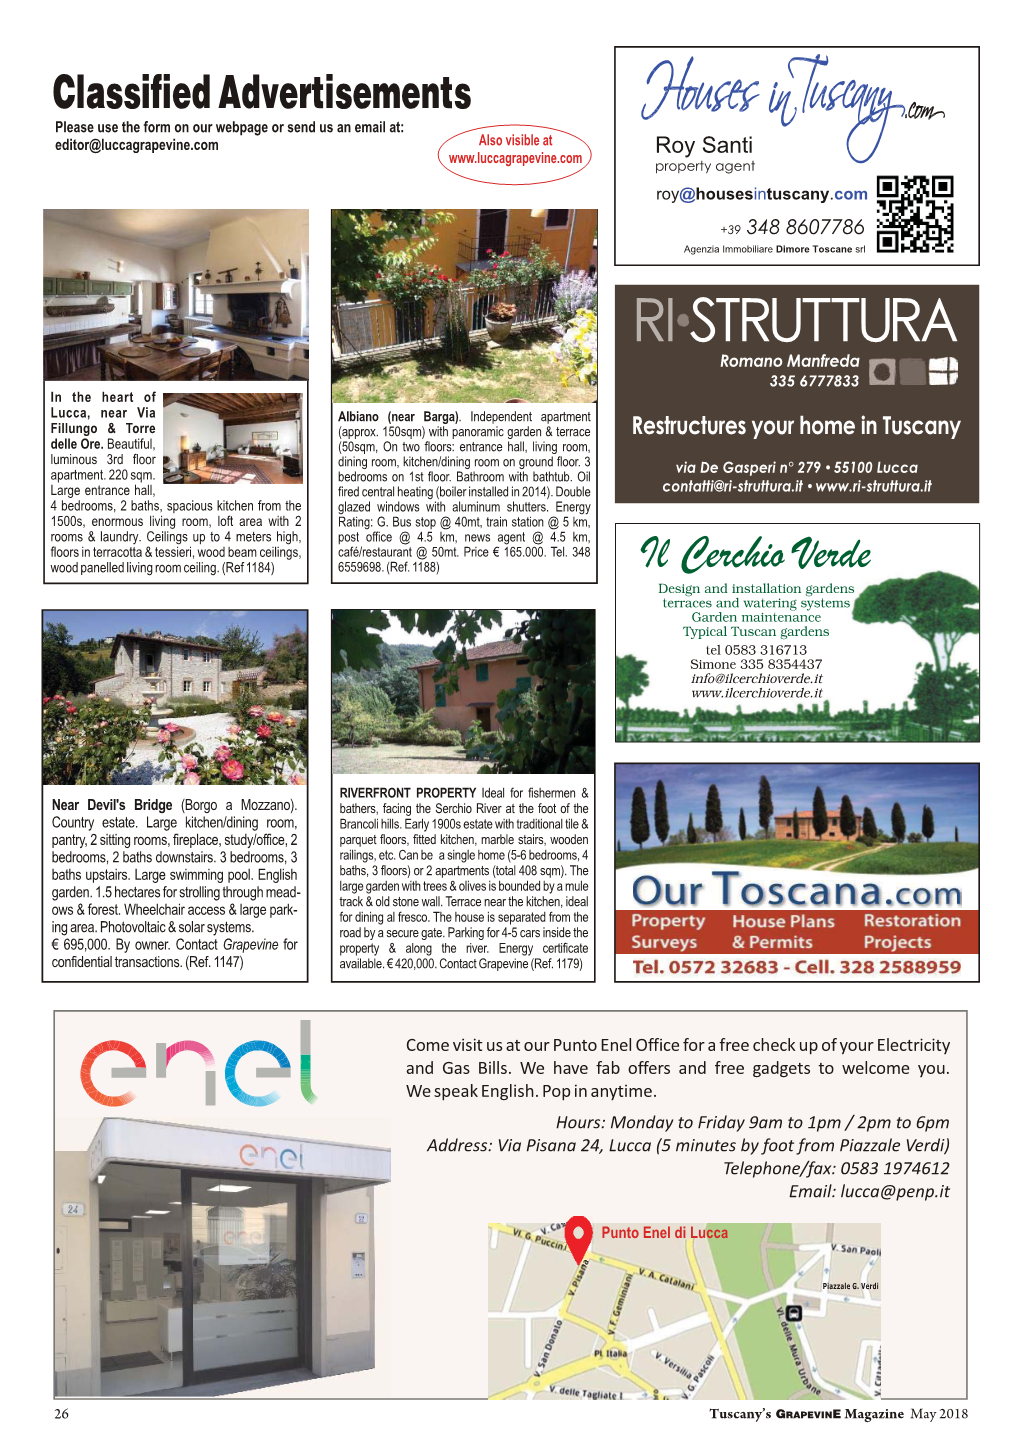 Classified Advertisements ~ May 2018 Issue